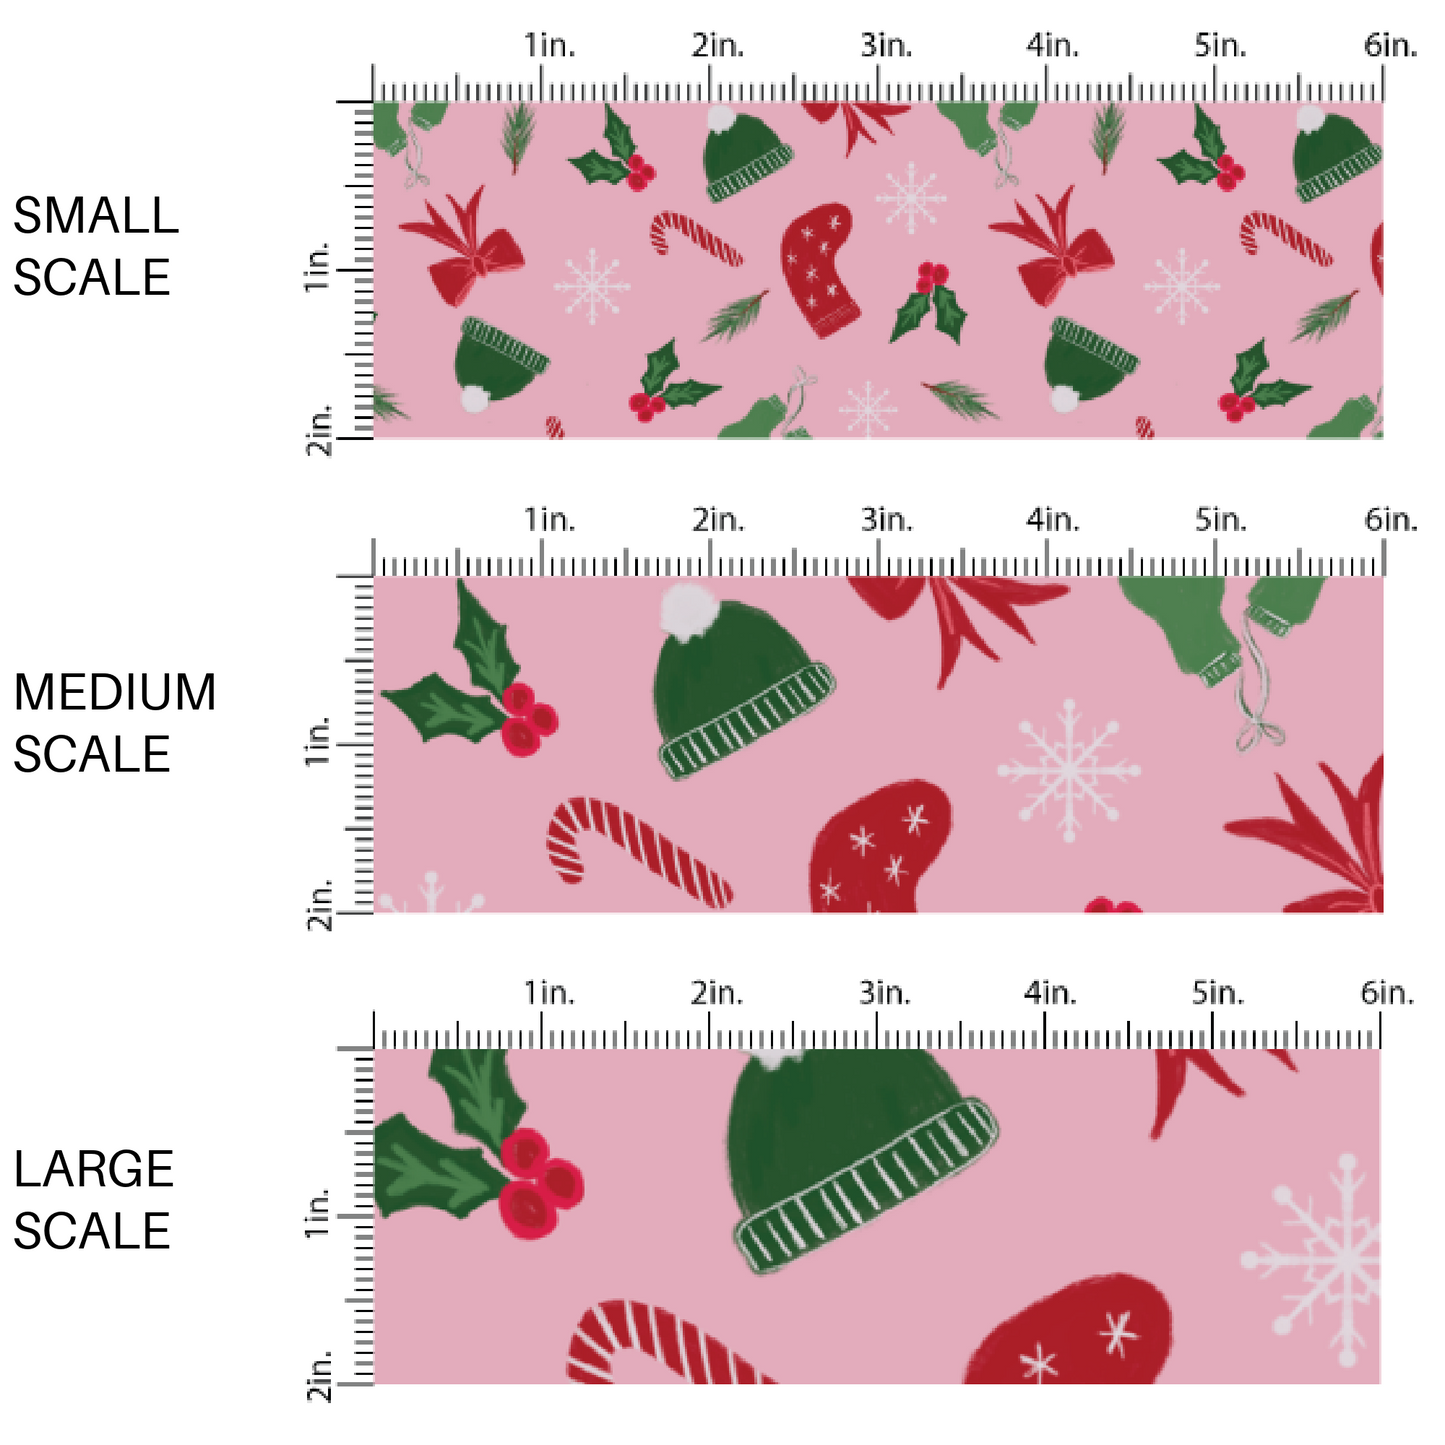 Pink fabric by the yard scaled image guide with mittens, candy canes, hats, and snowflakes.